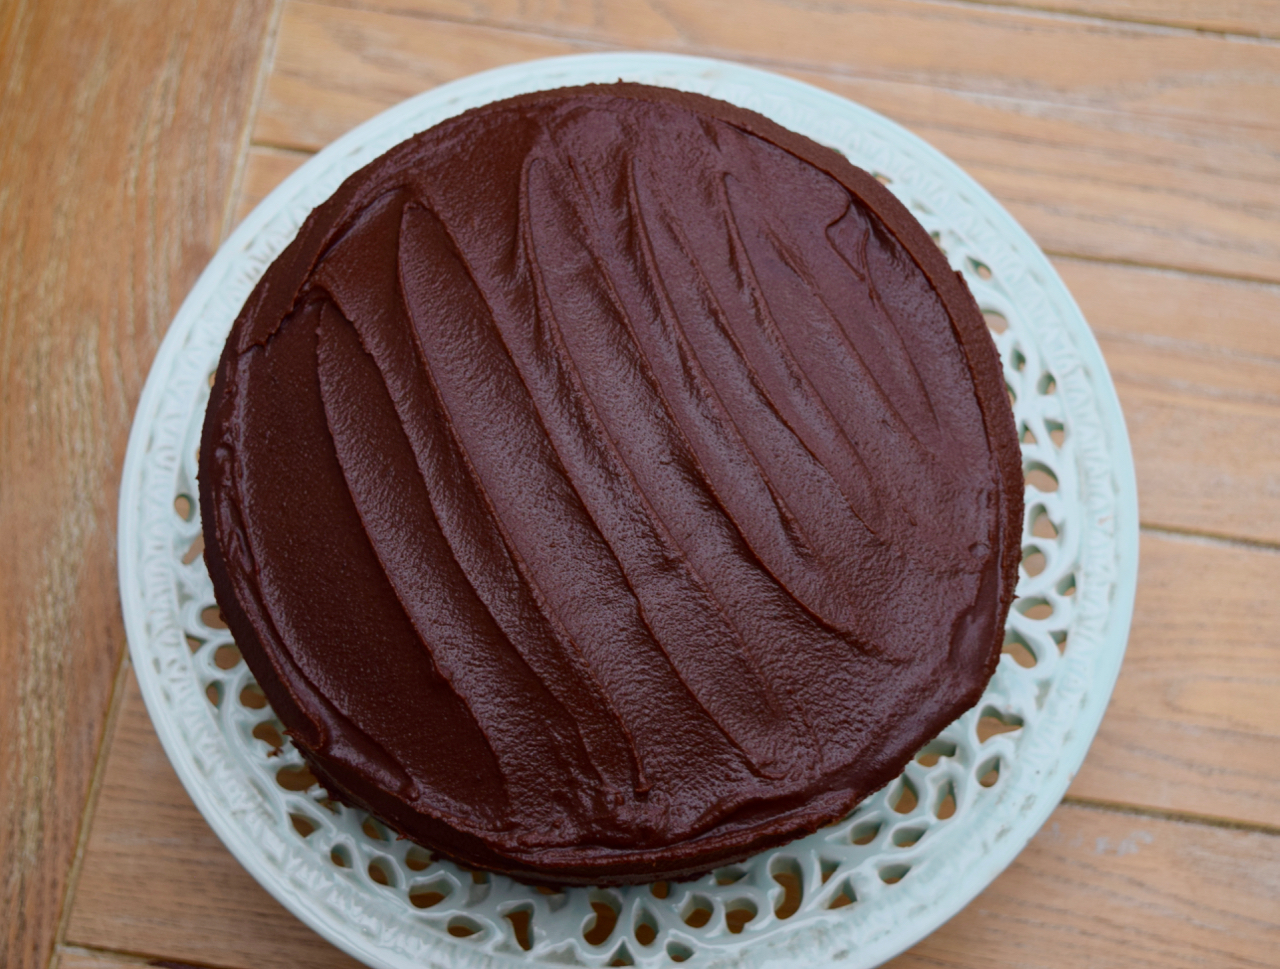 CHocolate-mayonnaise-cake-recipe-lucyloves-foodblog